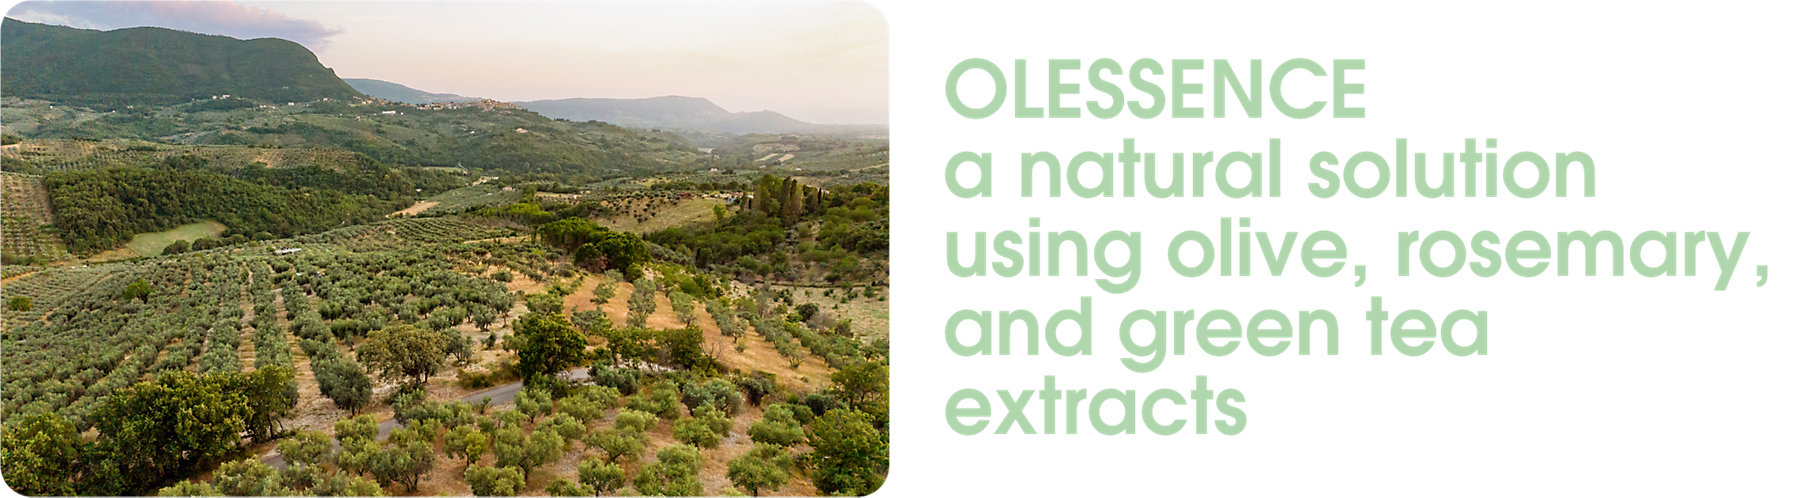 olive fields + natural extract